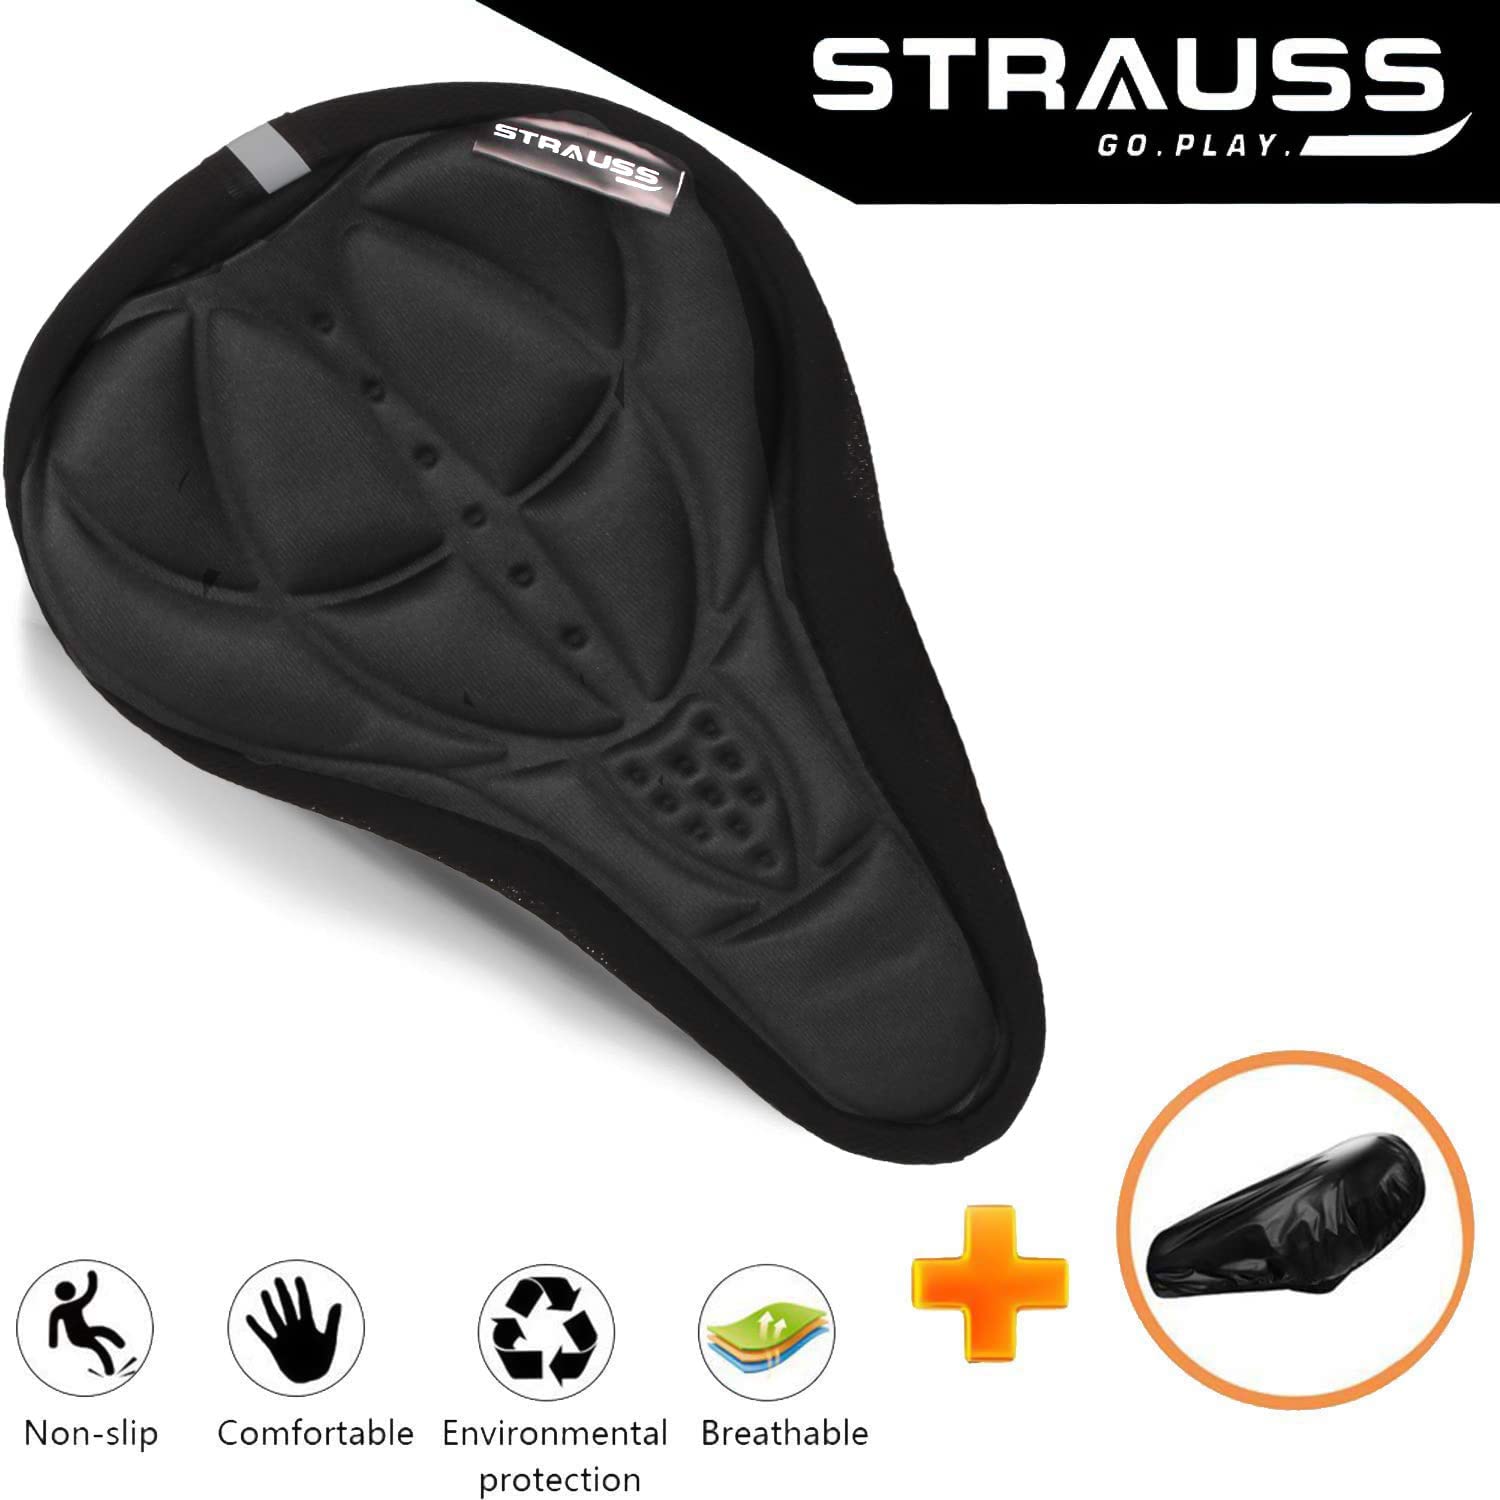 Strauss 3D Sponge Seat Cover, (Black), (Pack of 2)